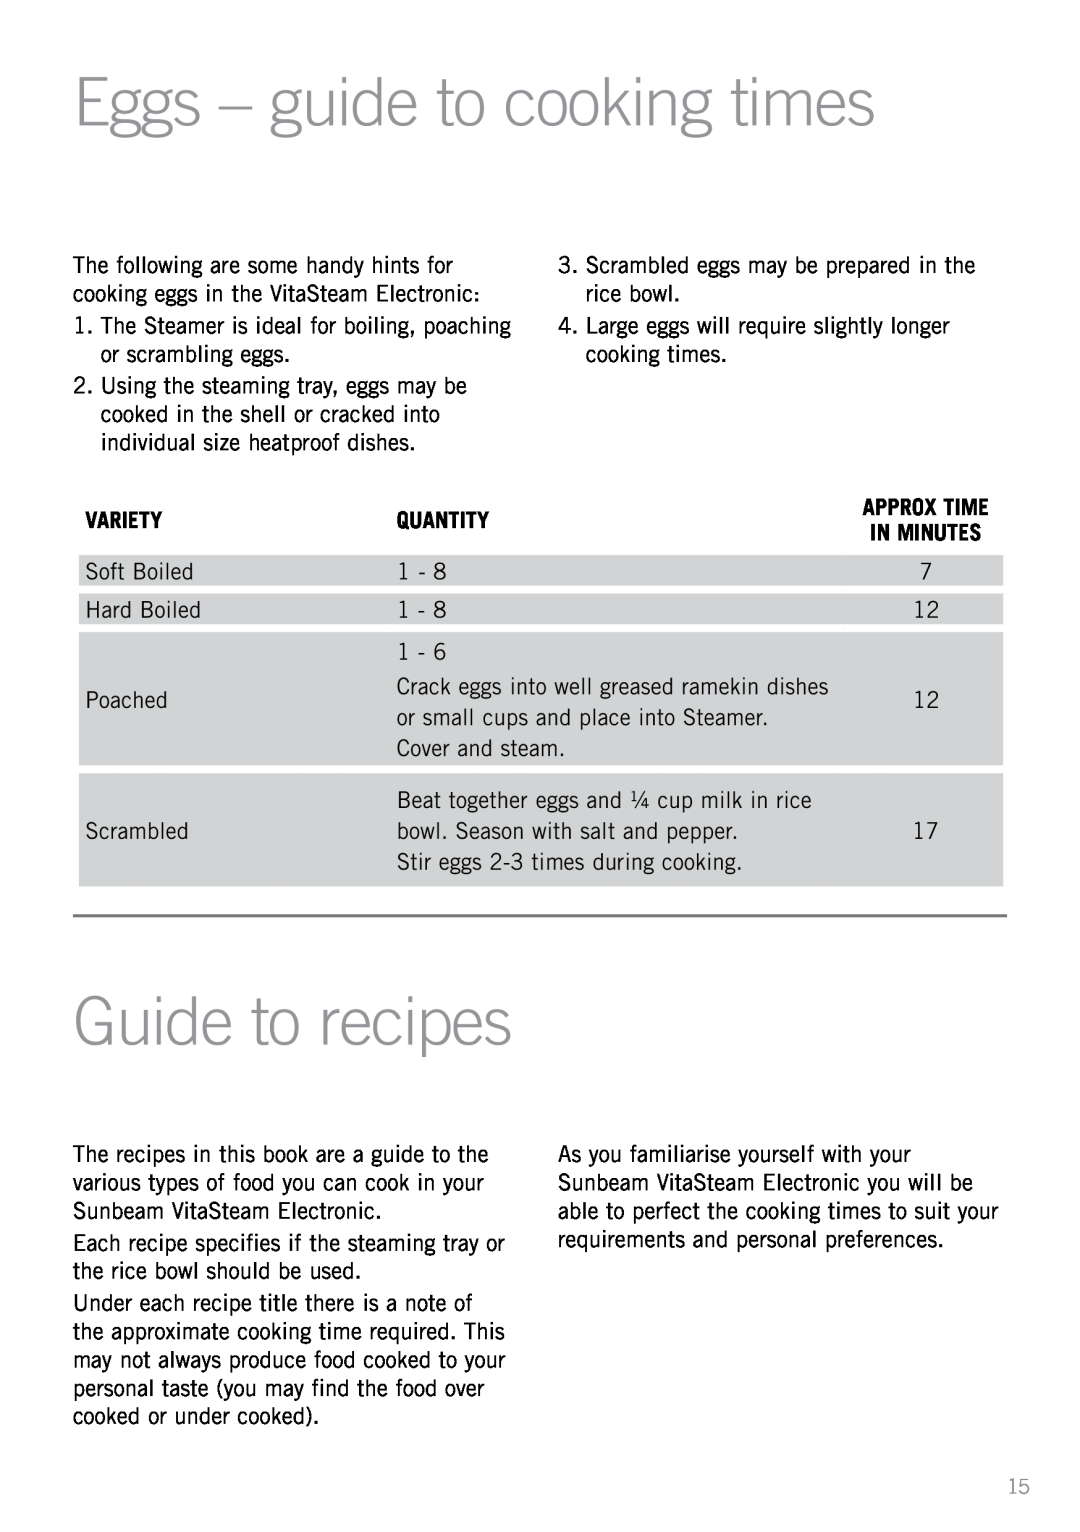 Sunbeam ST6820 manual Eggs - guide to cooking times, Guide to recipes 